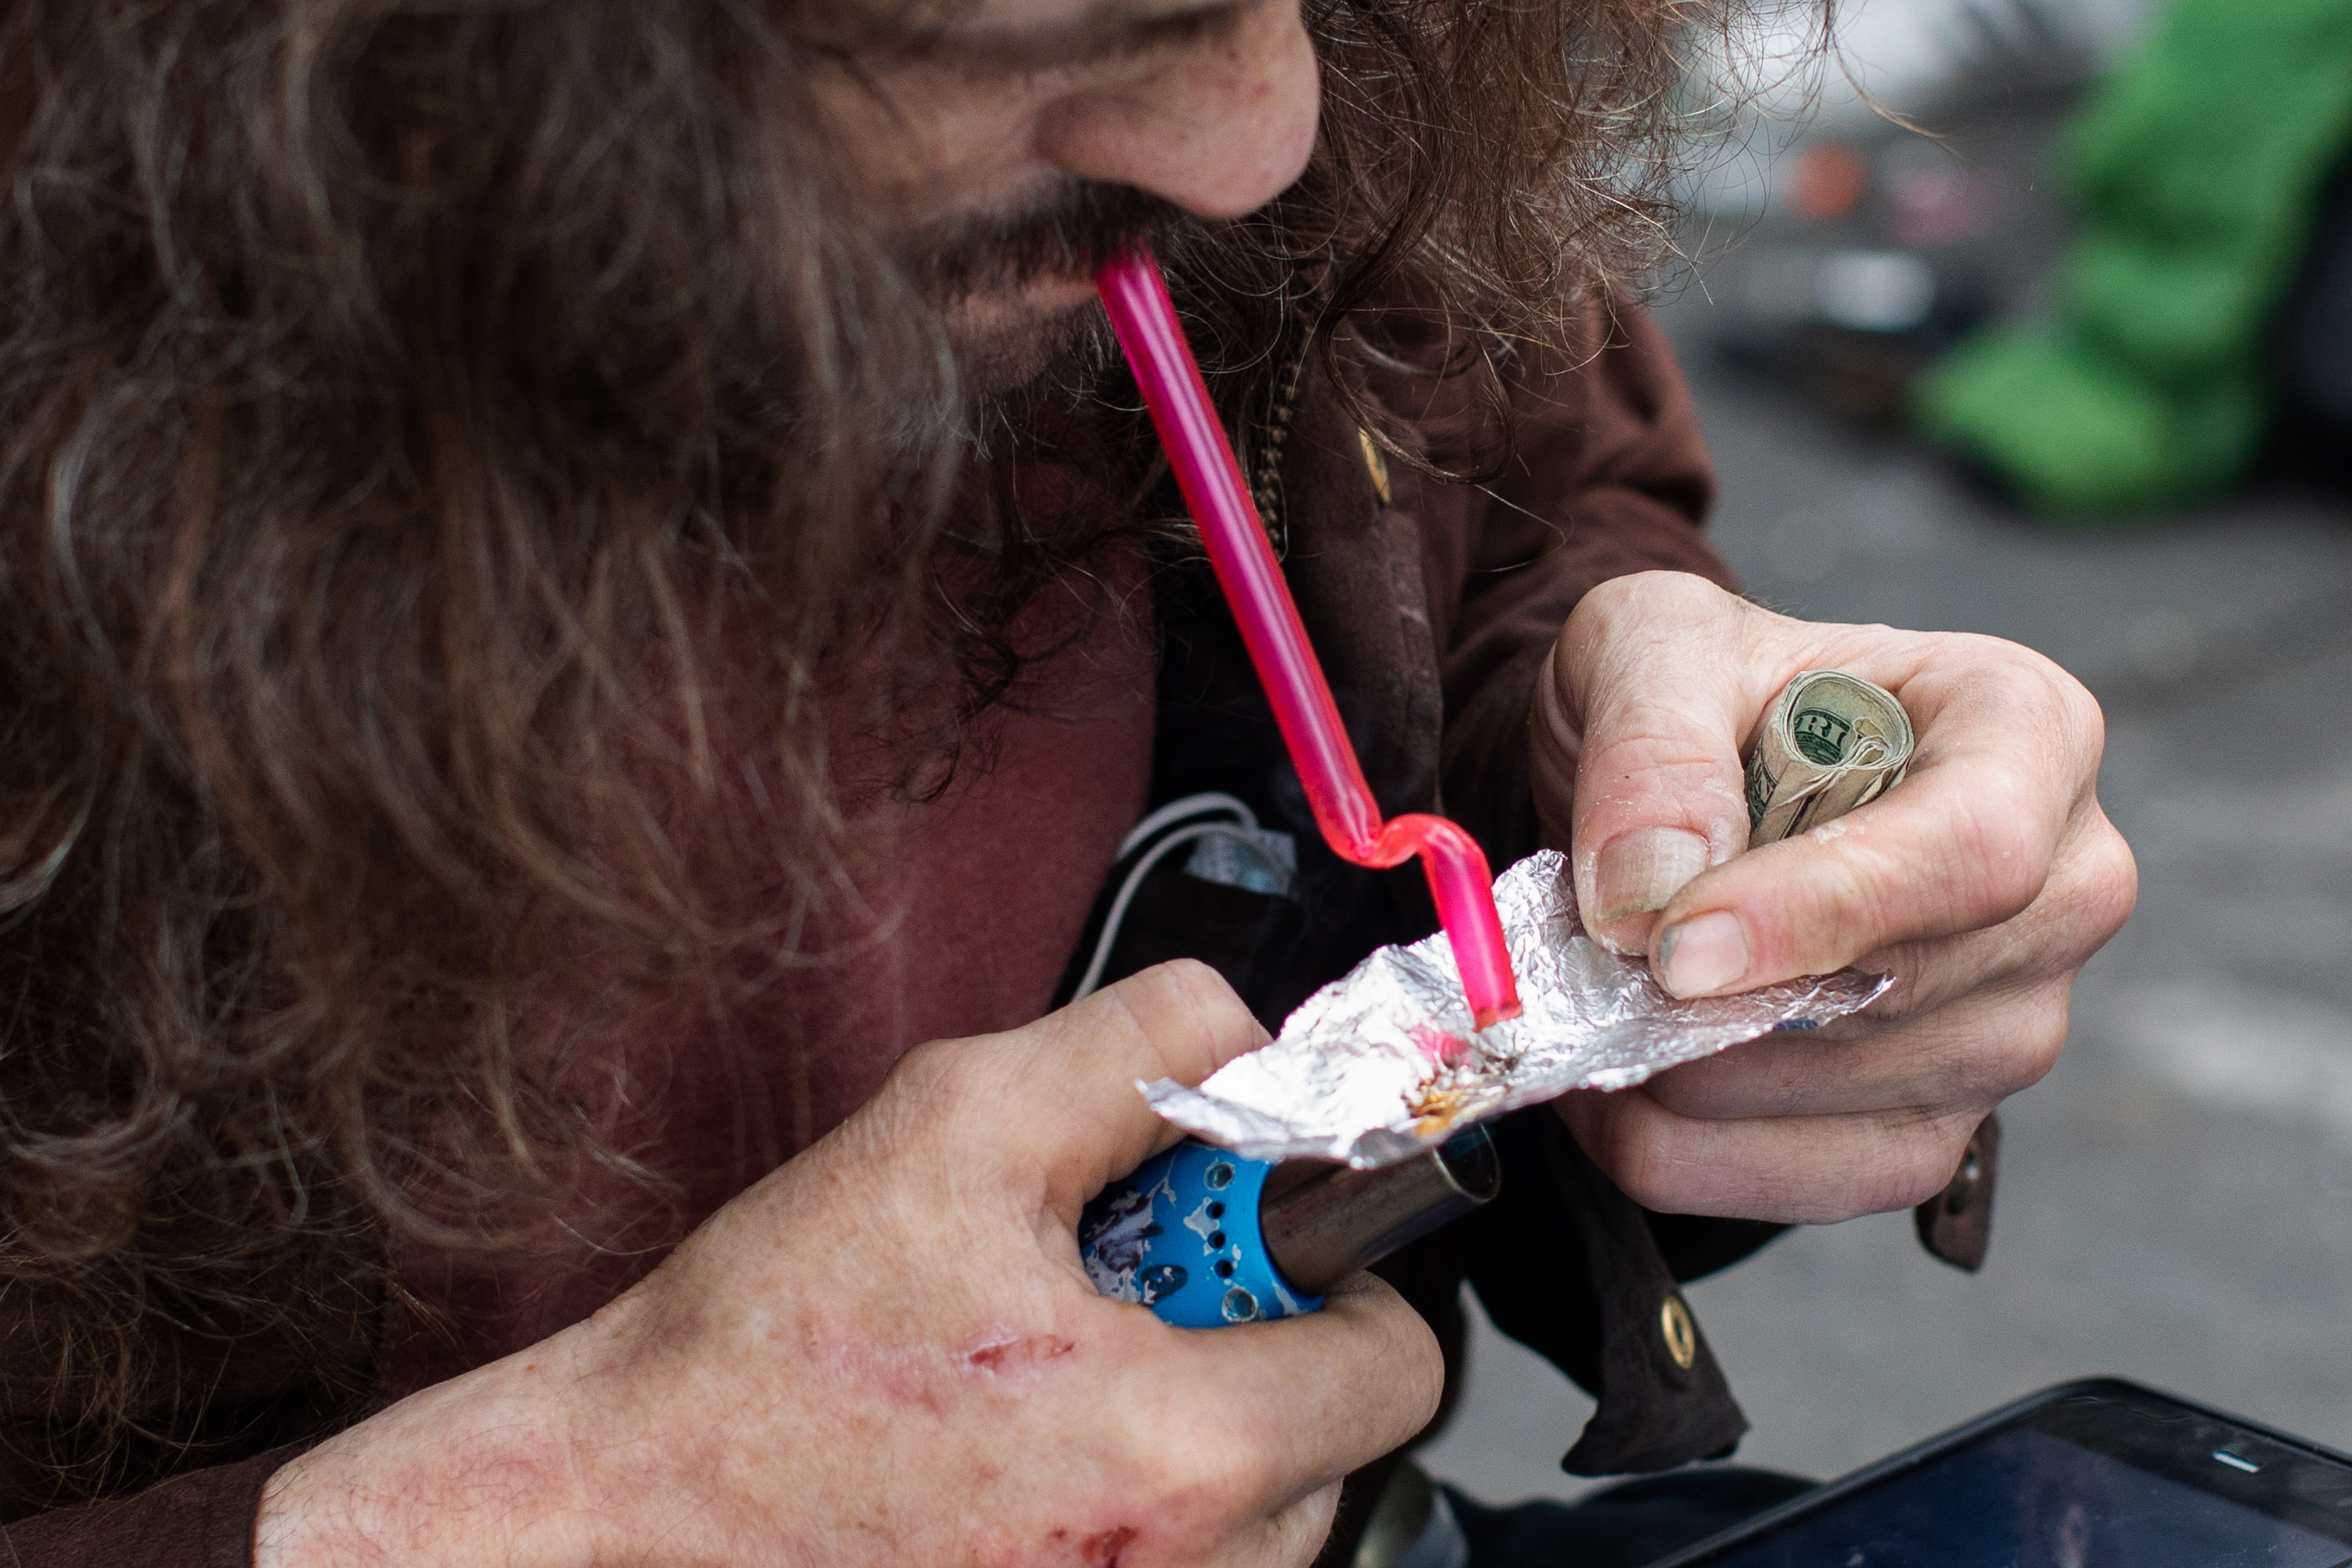 A man smokes drugs on tinfoil using a straw.